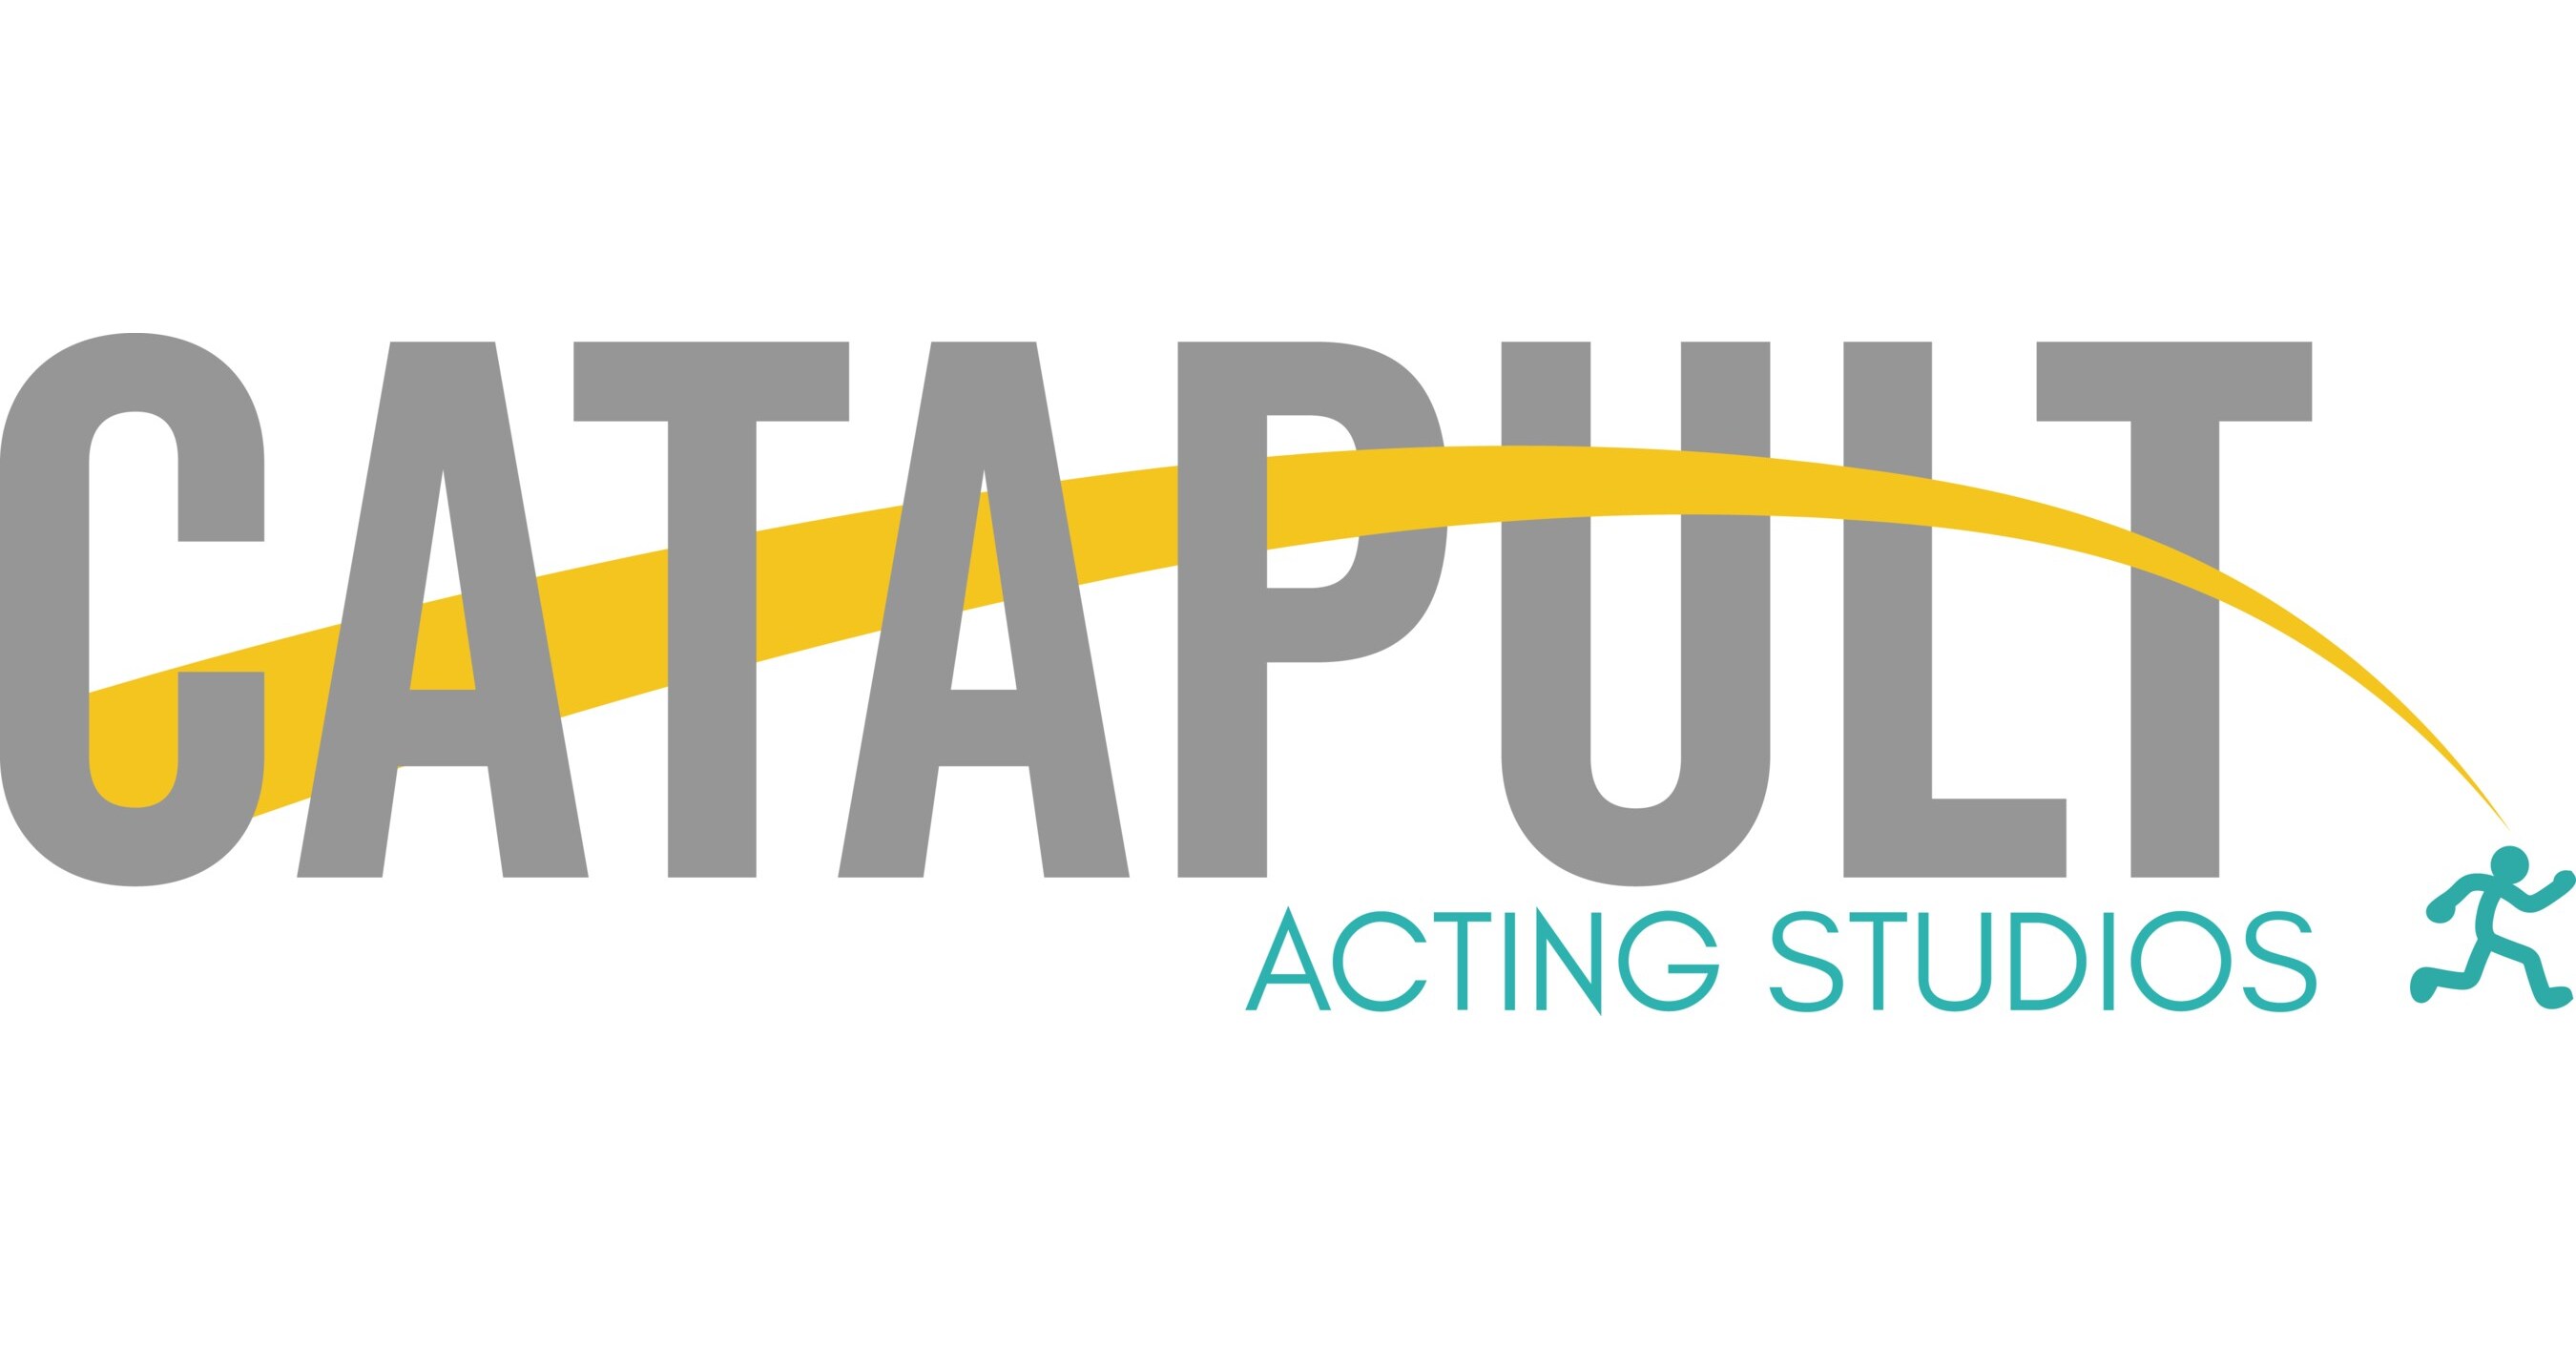 Breaking New Ground: Atlanta Welcomes Catapult’s Film & TV Acting Conservatory